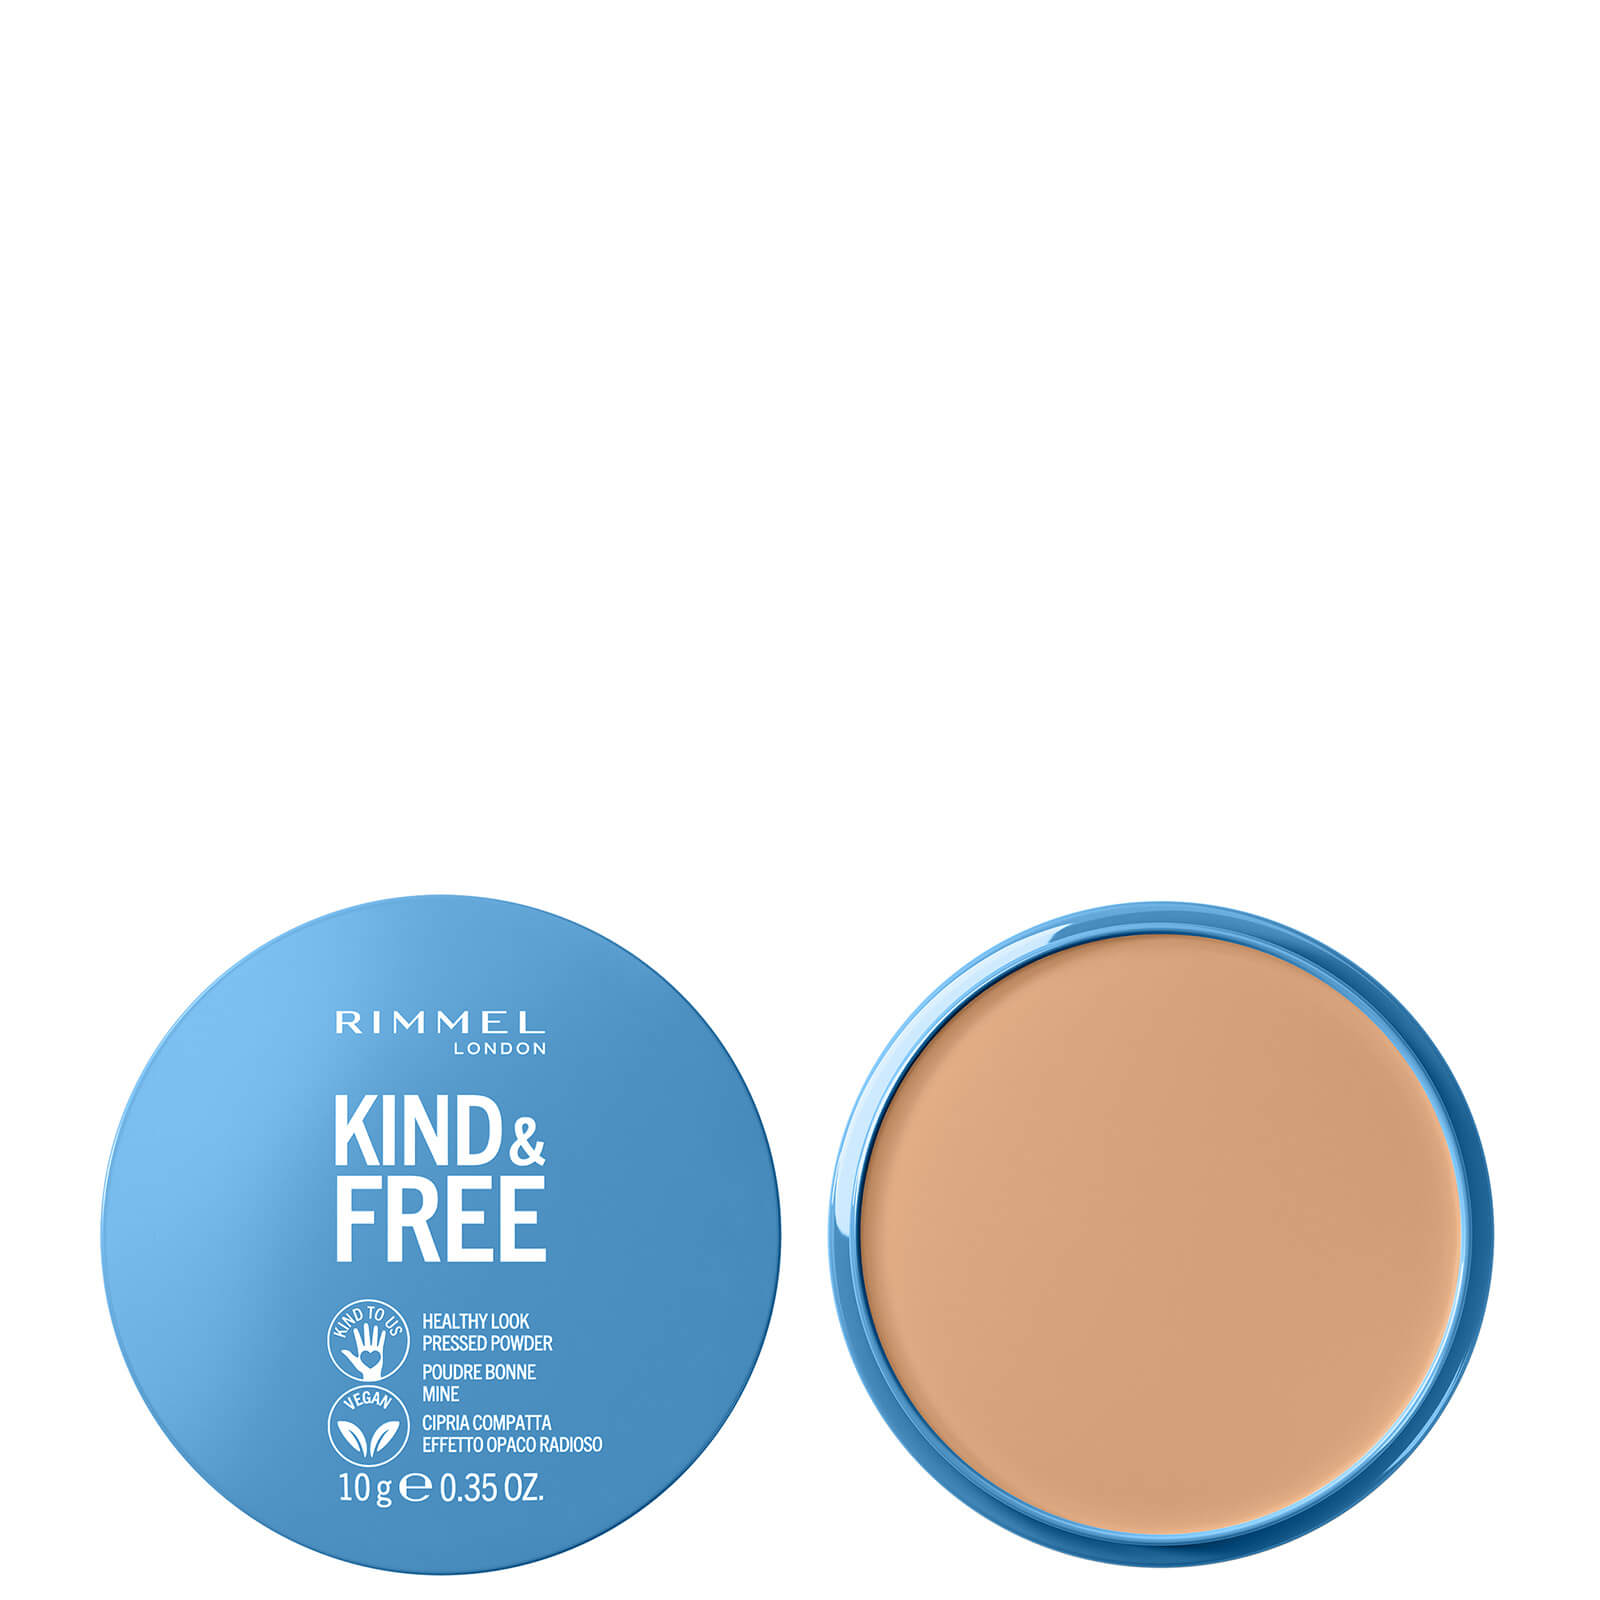 Rimmel Kind and Free Pressed Powder 10g (Various Shades) - Light